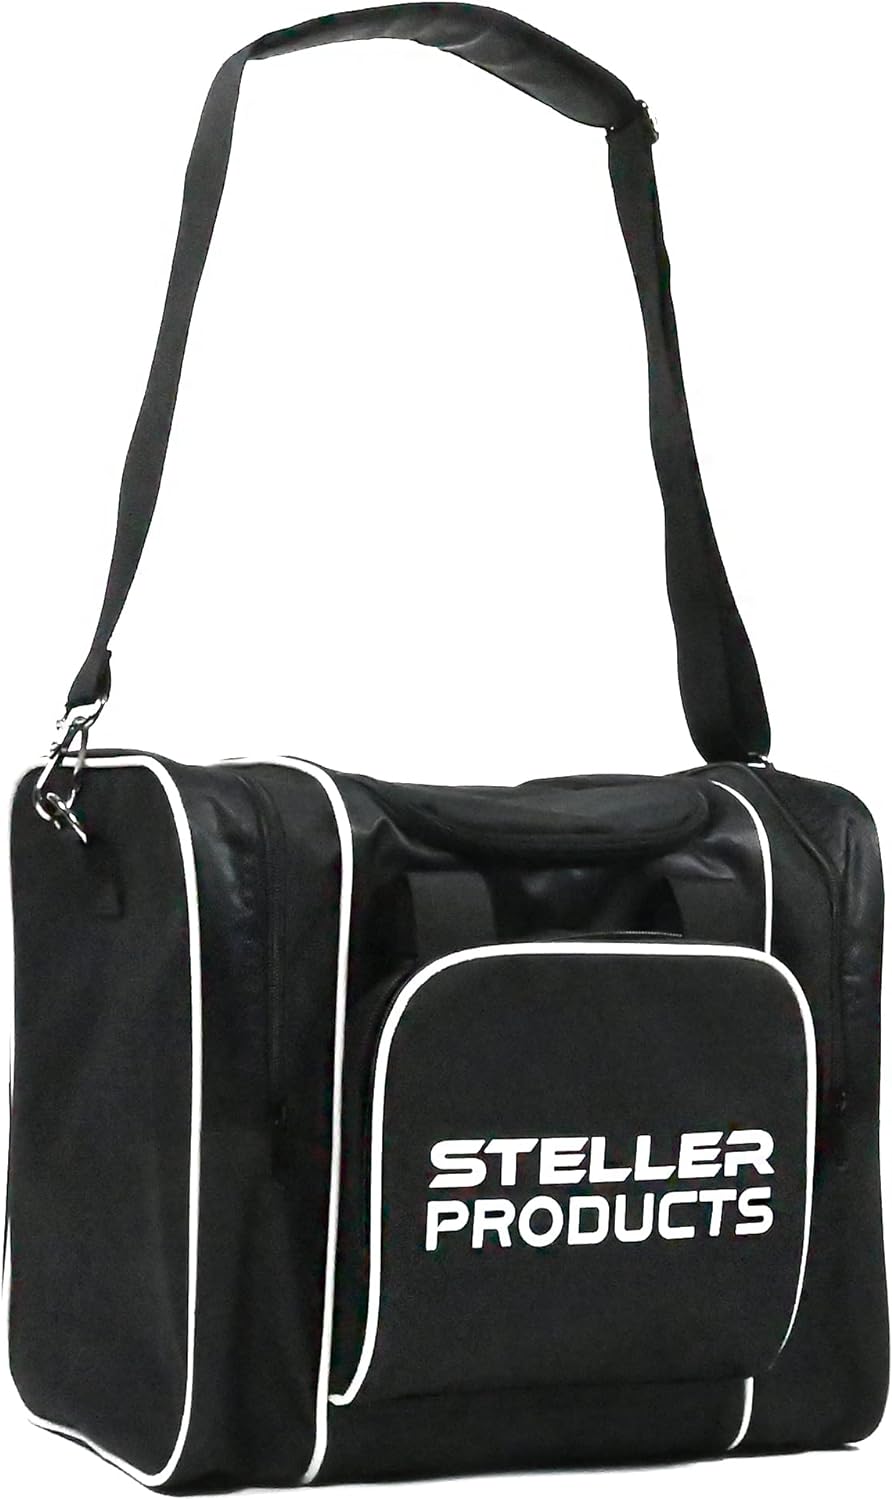 STELLER PRODUCTS Bowling Ball Bag - Single Tote Bag With Padded Cup Ball Holder, Shoulder Straps, Metal Hardware  4 Anti-Slip Bases - Fit Two Pairs of Bowling Shoes Up to Men 15  Accessories – Black